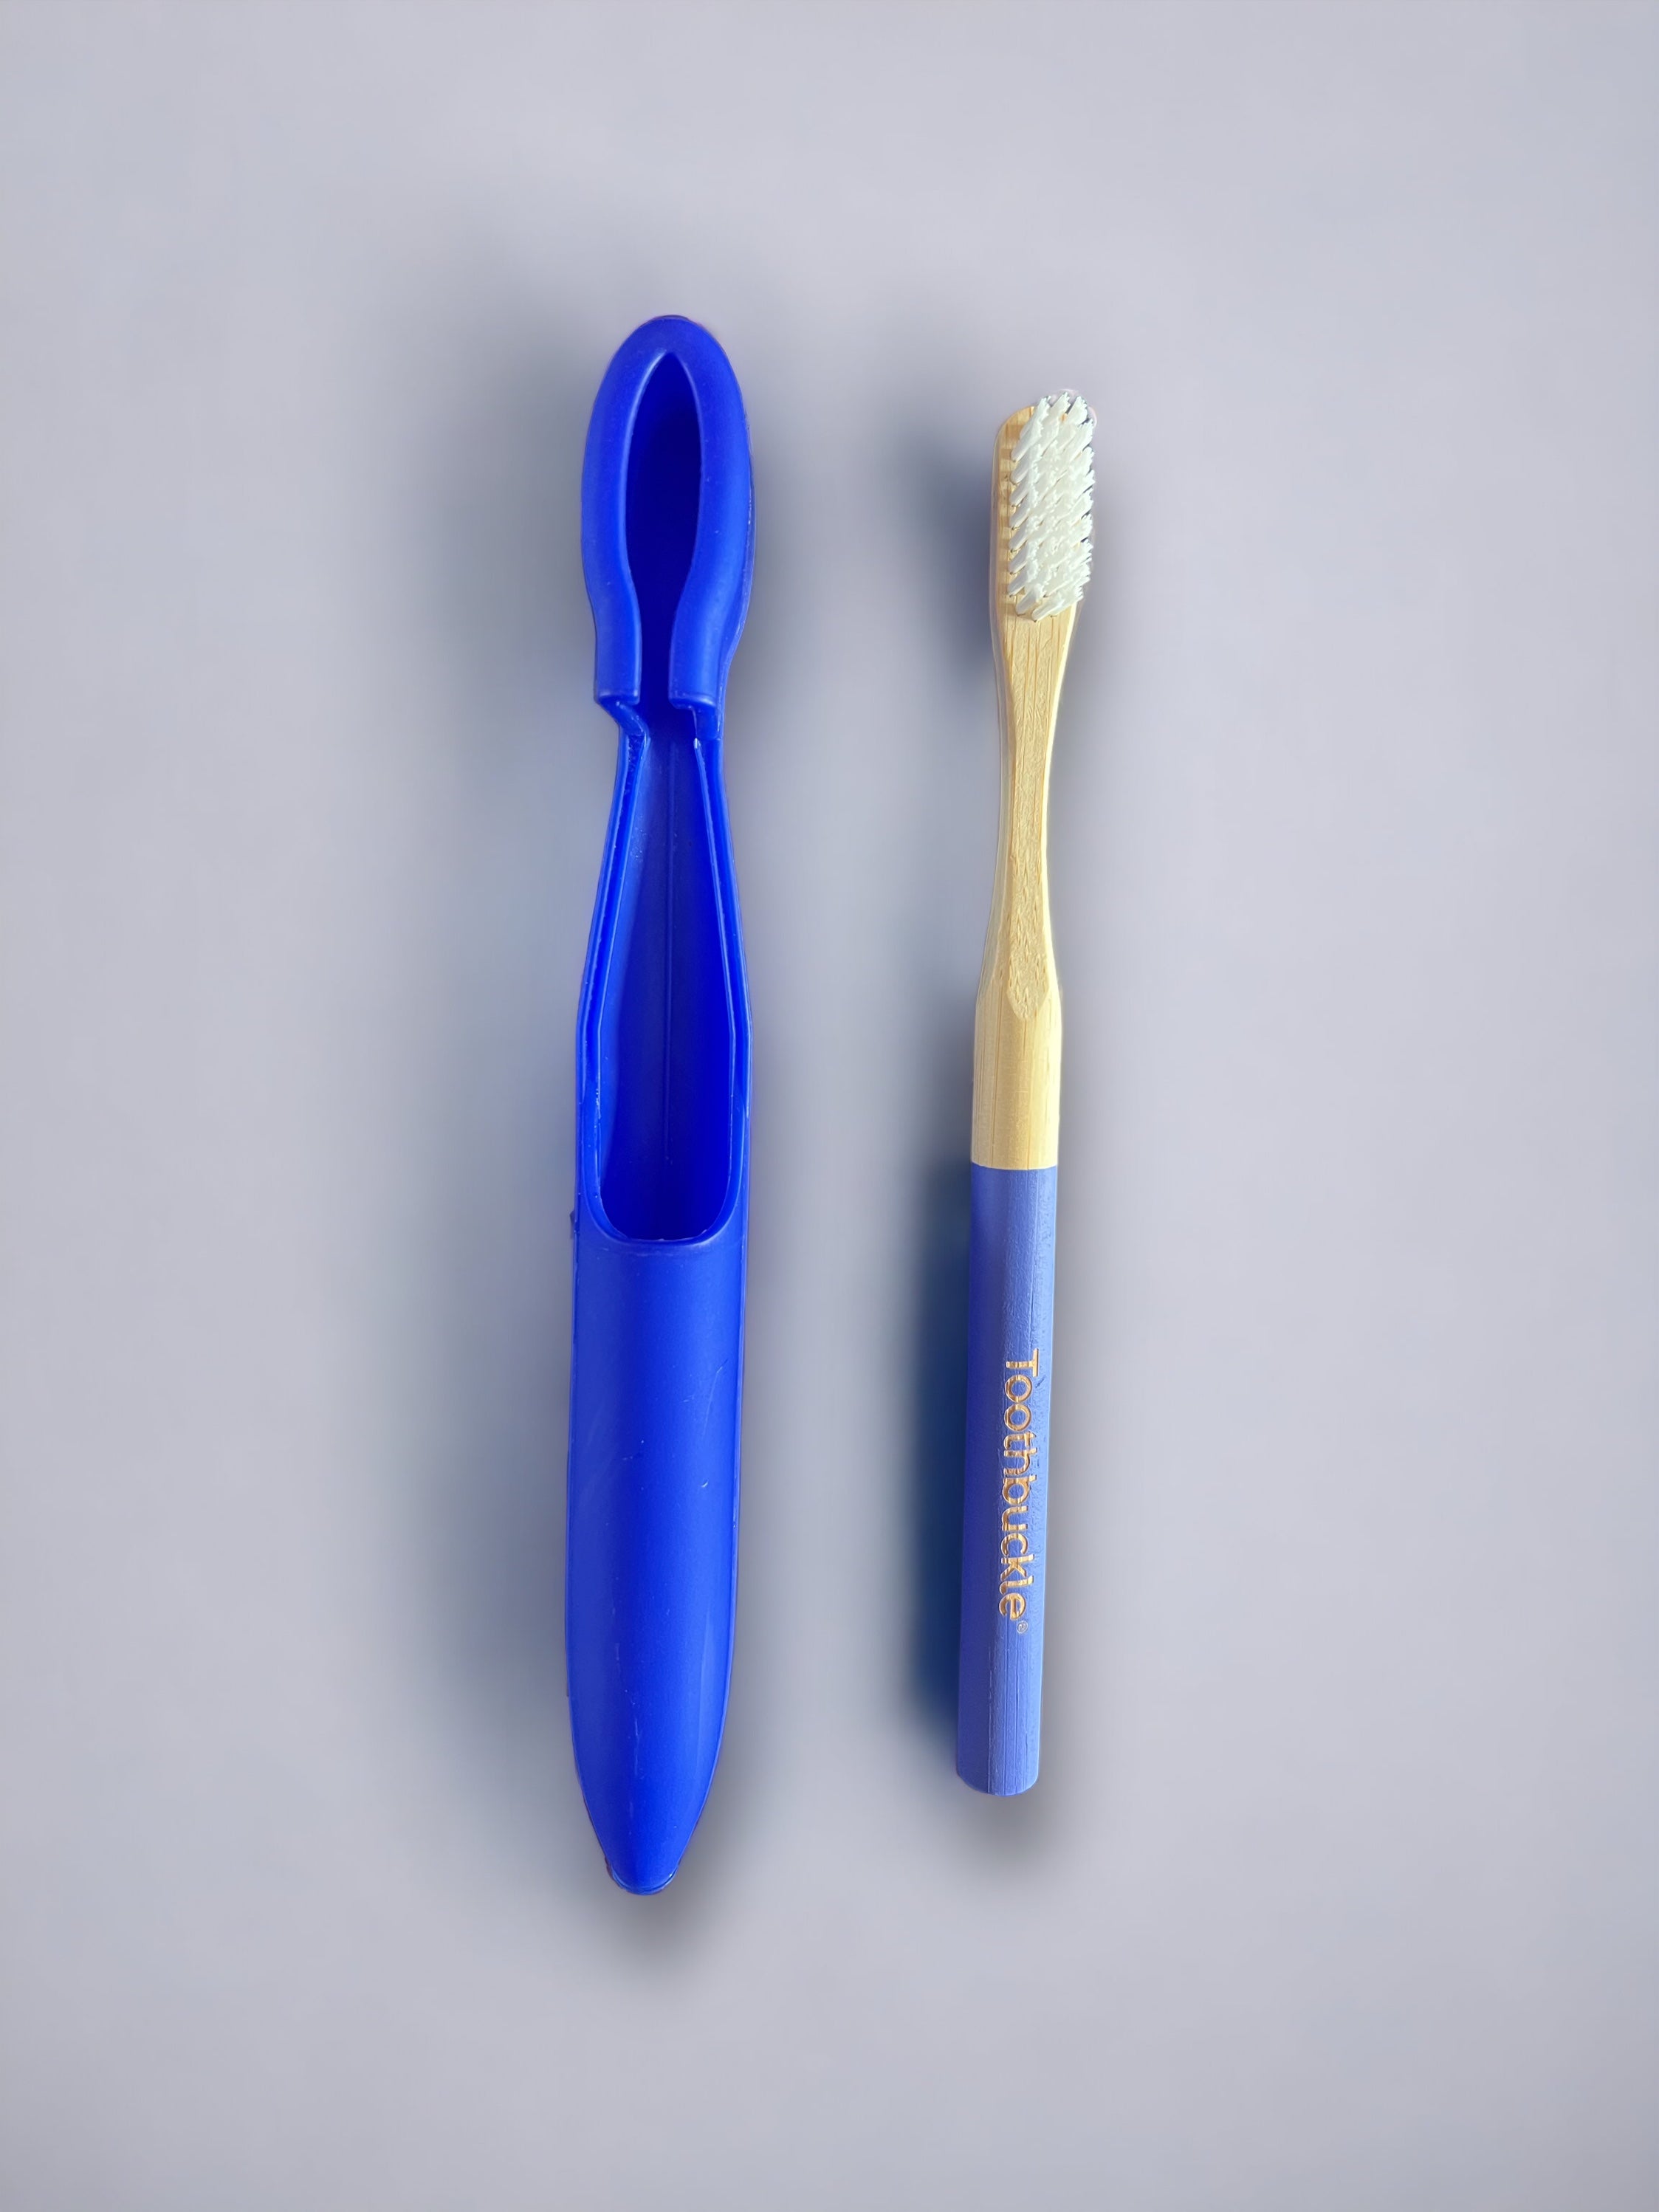 Santorini Sky Collection | Adult Toothbrush Covers + Bamboo Toothbrushes